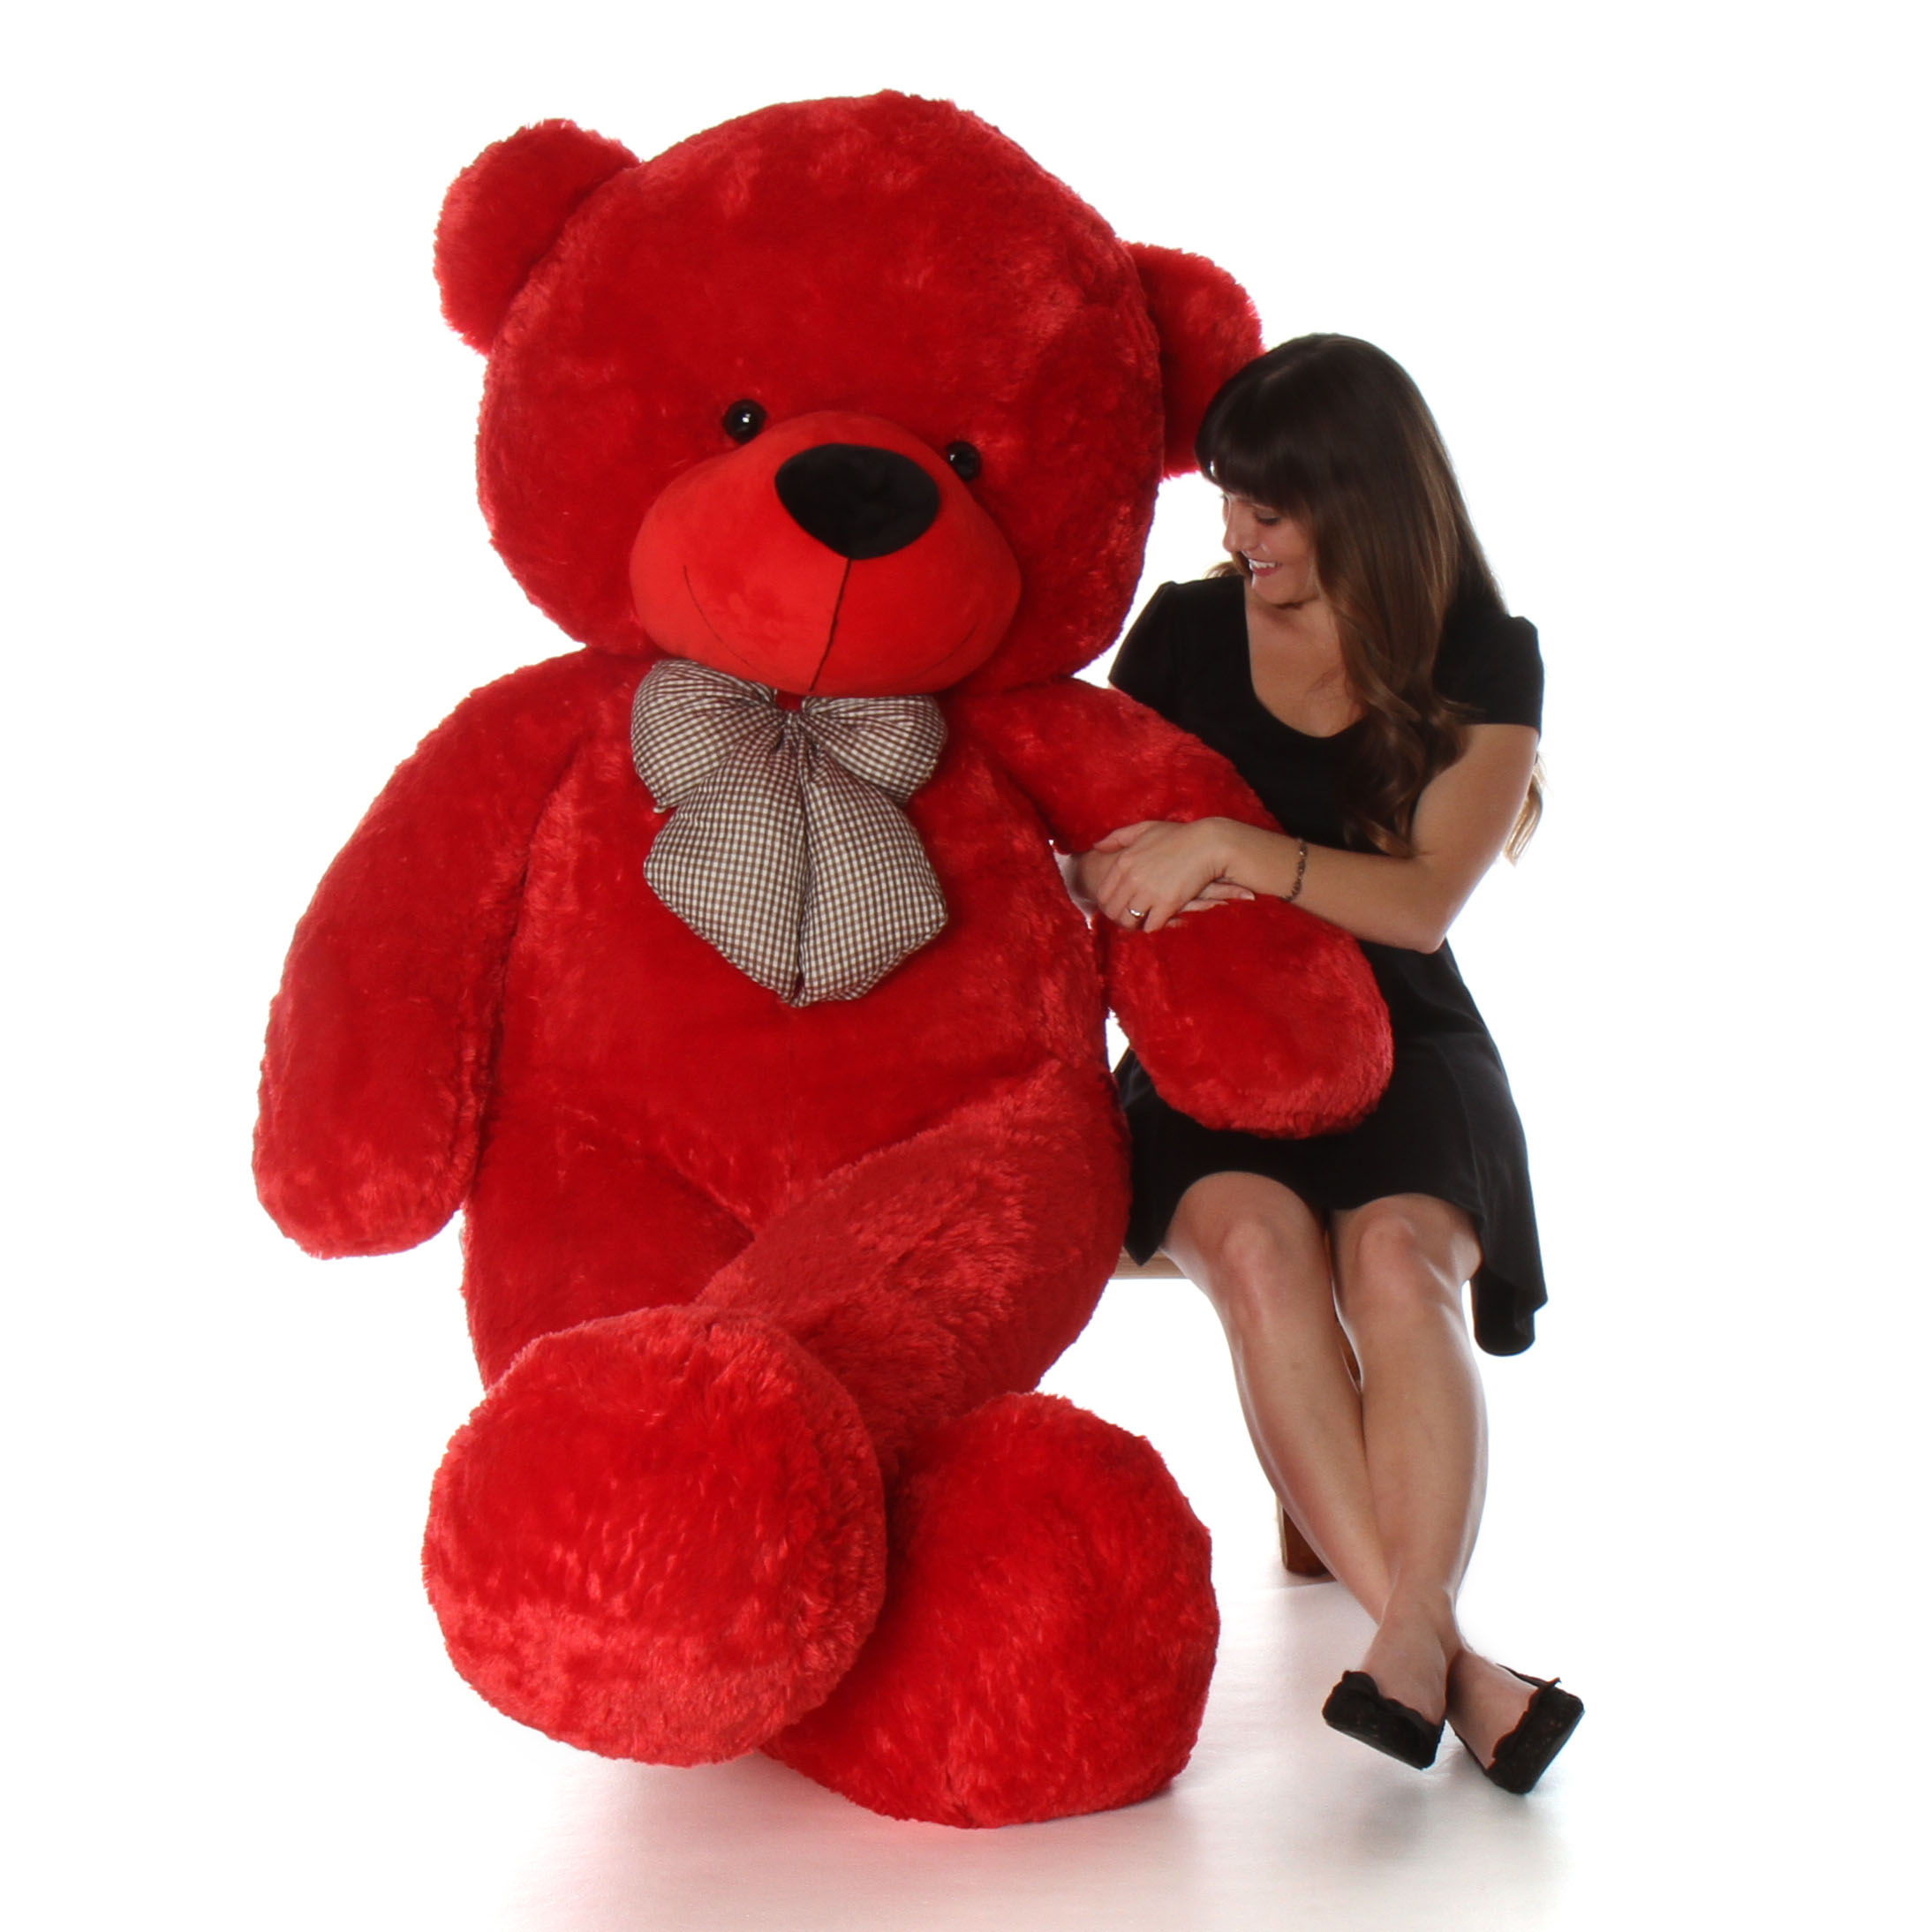 humongous-life-size-72in-red-teddy-bear-bitsy-cuddles-perfect-christmas-or-valentines-teddy-bear.jpg